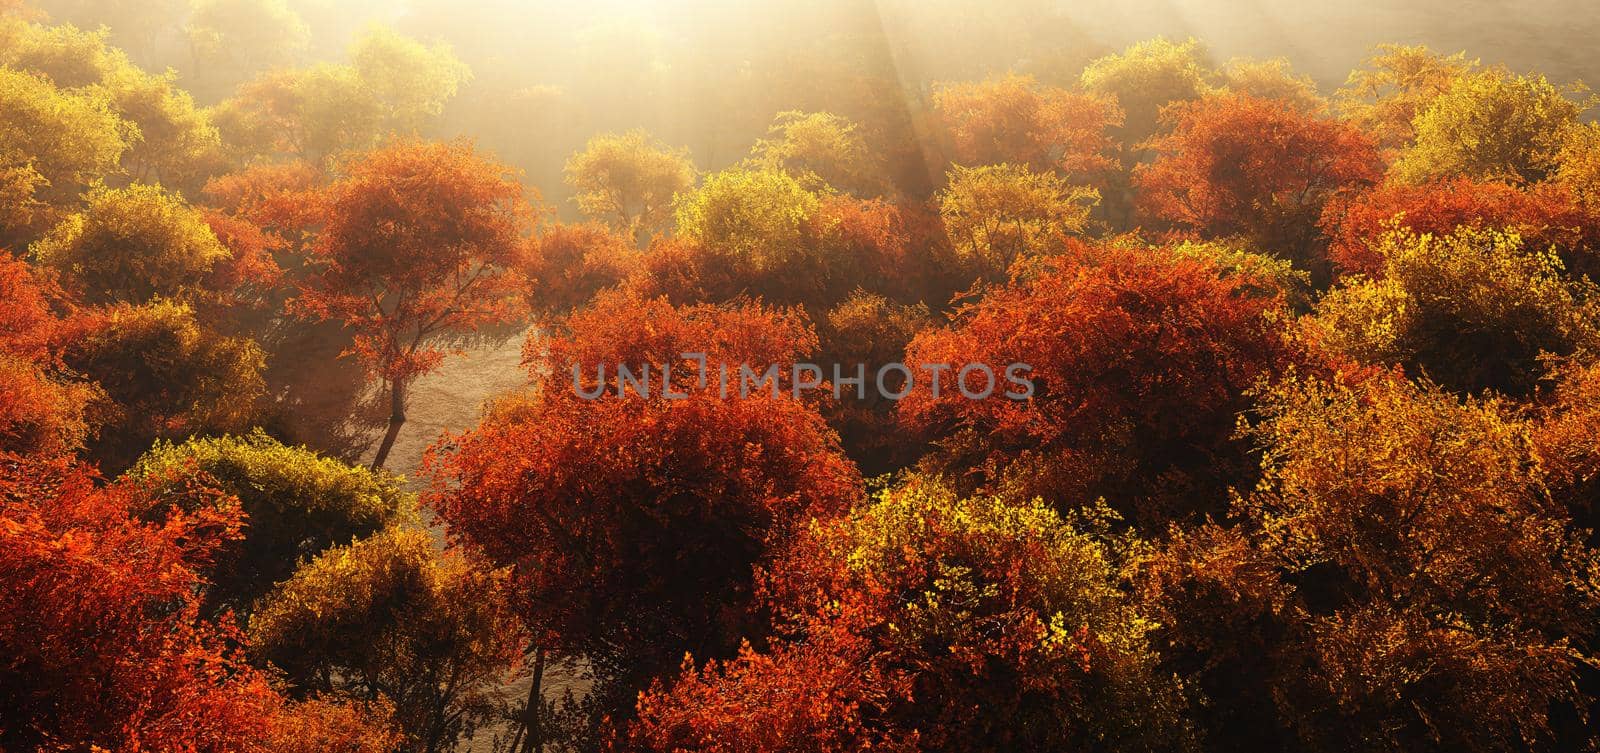 autumn fores thigh view sun ray, 3d render illustration